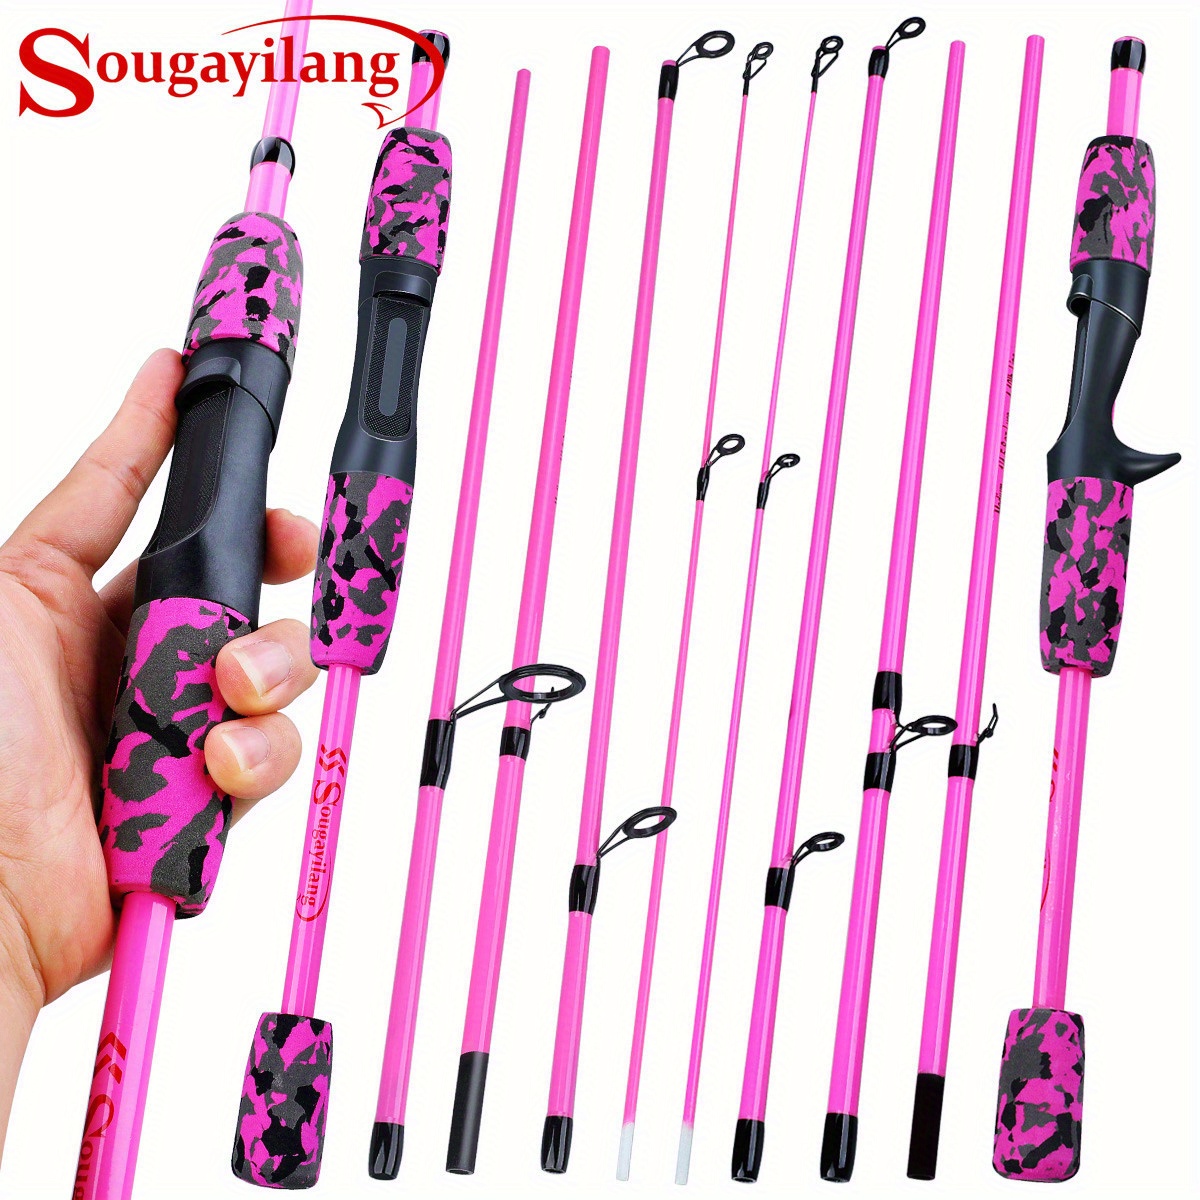 Sougayilang 1pc 170cm/5.5ft Glassfiber Fishing Rod, 5 Sections Telescopic  Spinning/Casting Rod For Freshwater